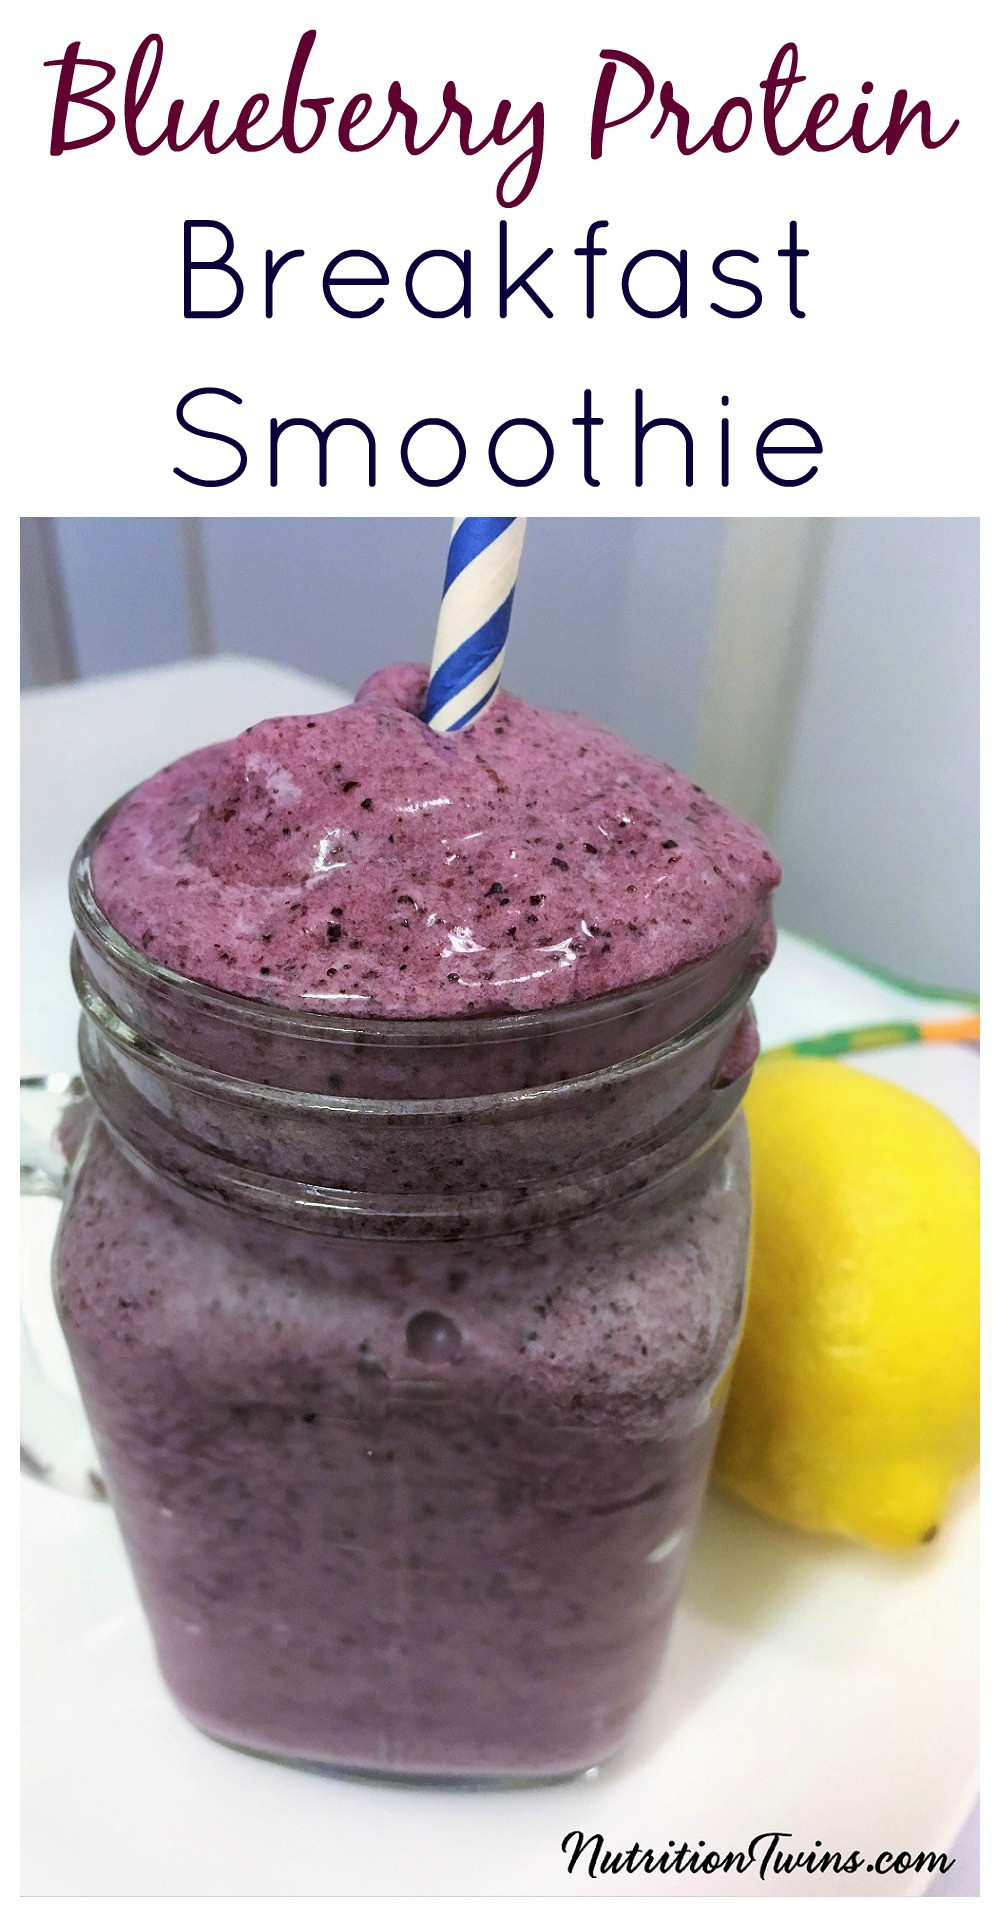 Smoothie Recipes For Weight Loss And Energy
 Blueberry Protein Weight Loss Breakfast Smoothie